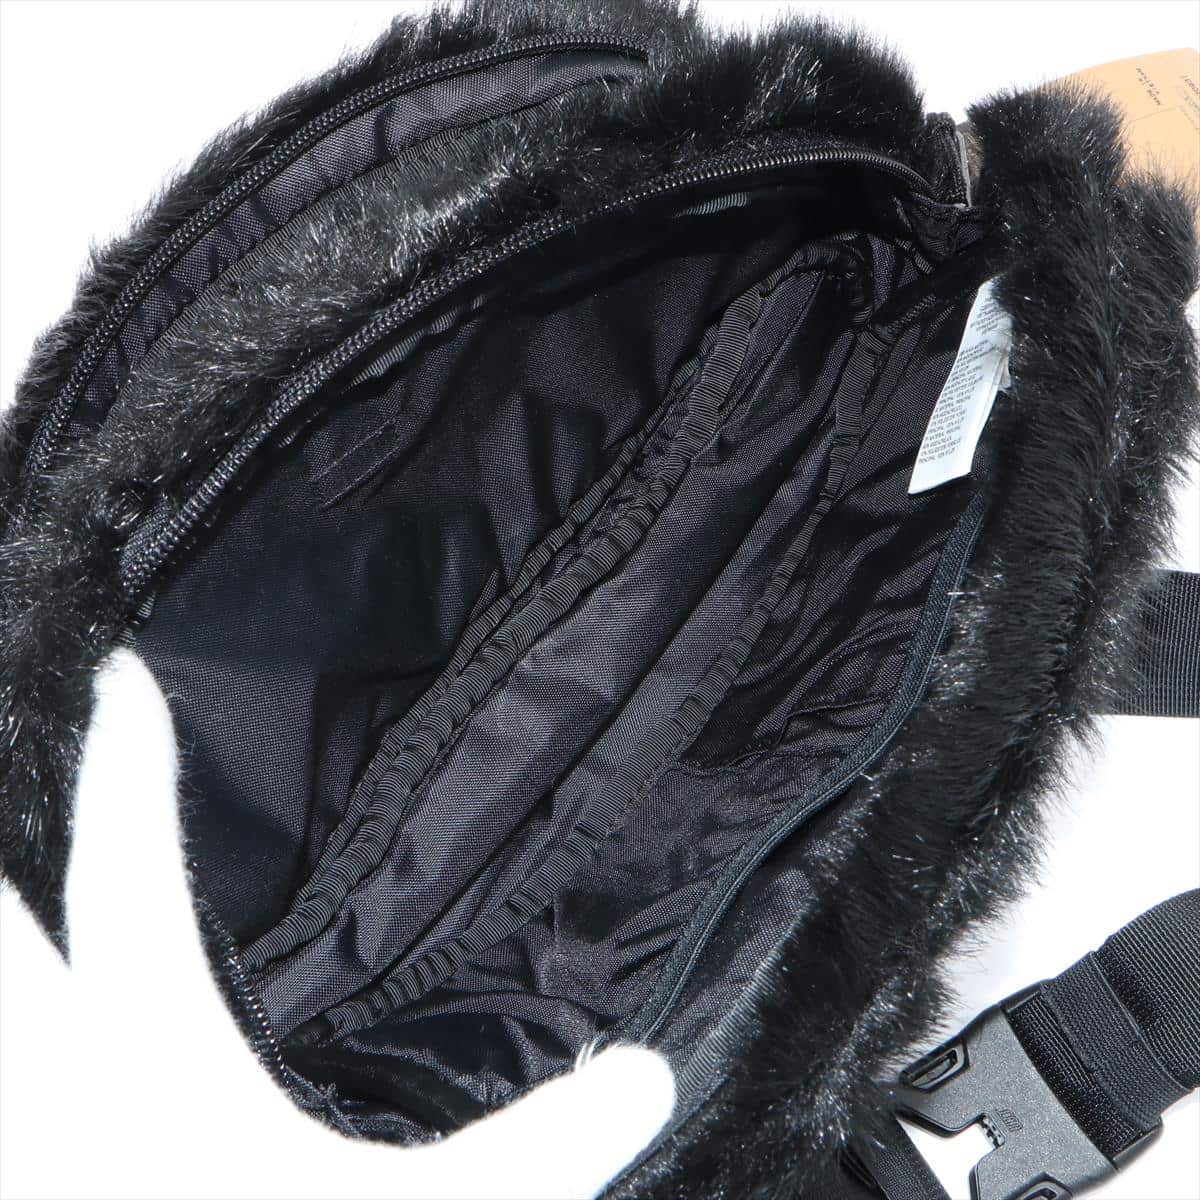 SUPREME × THE NORTH FACE Fur Sling backpack Black 2020AW There is a slight perfume smell